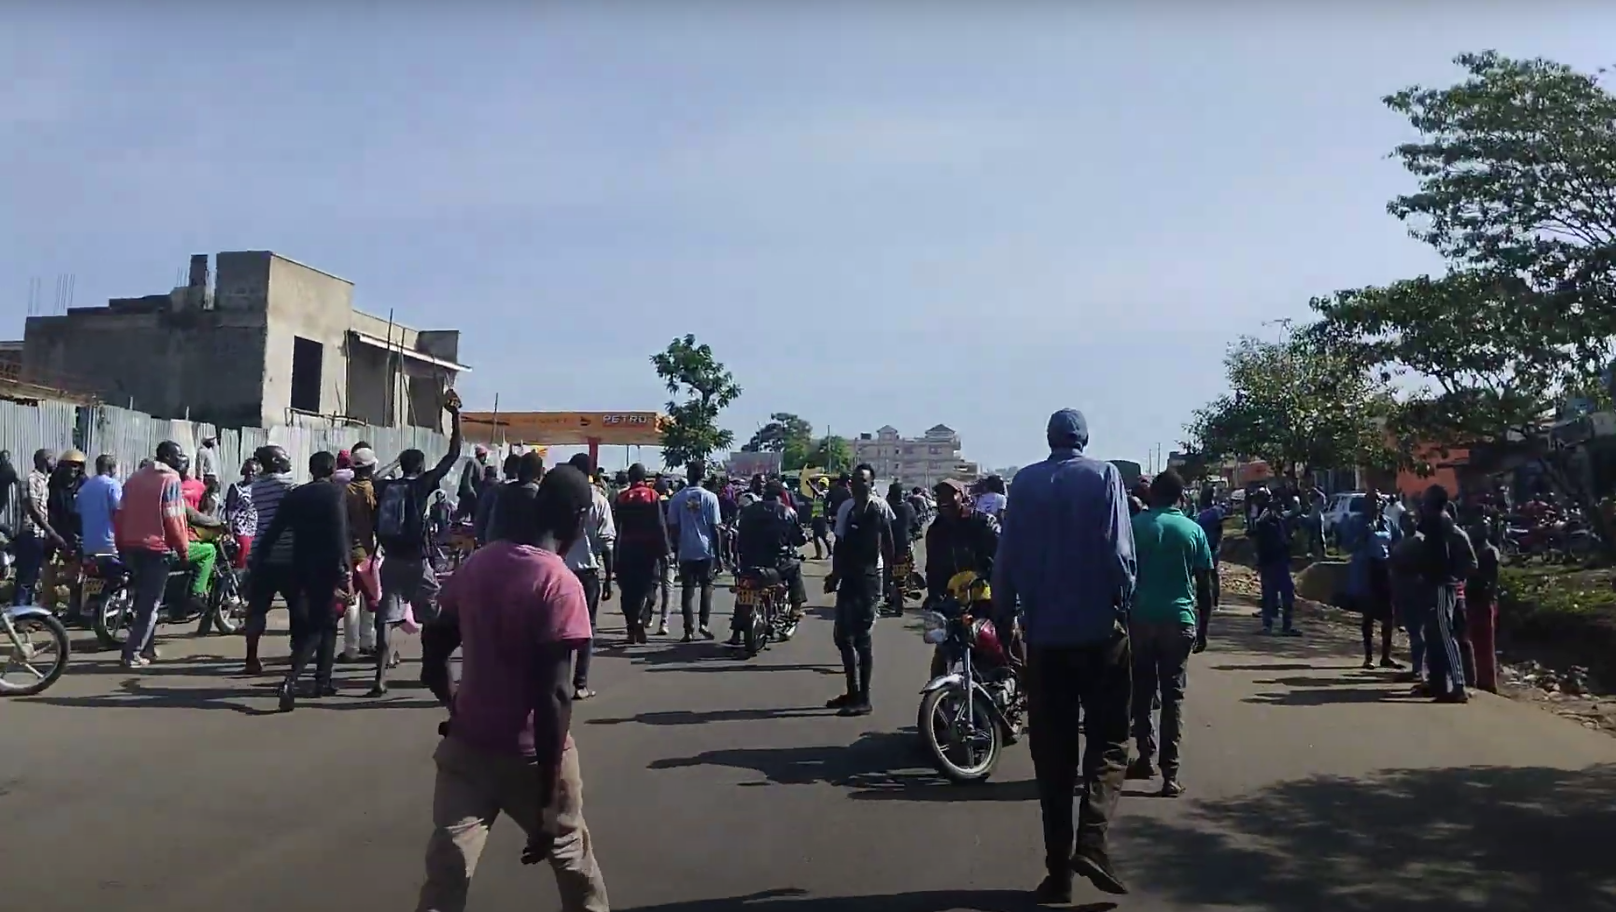 Migori County residents holding demonstrations against government. PHOTO/SCREENGRAB